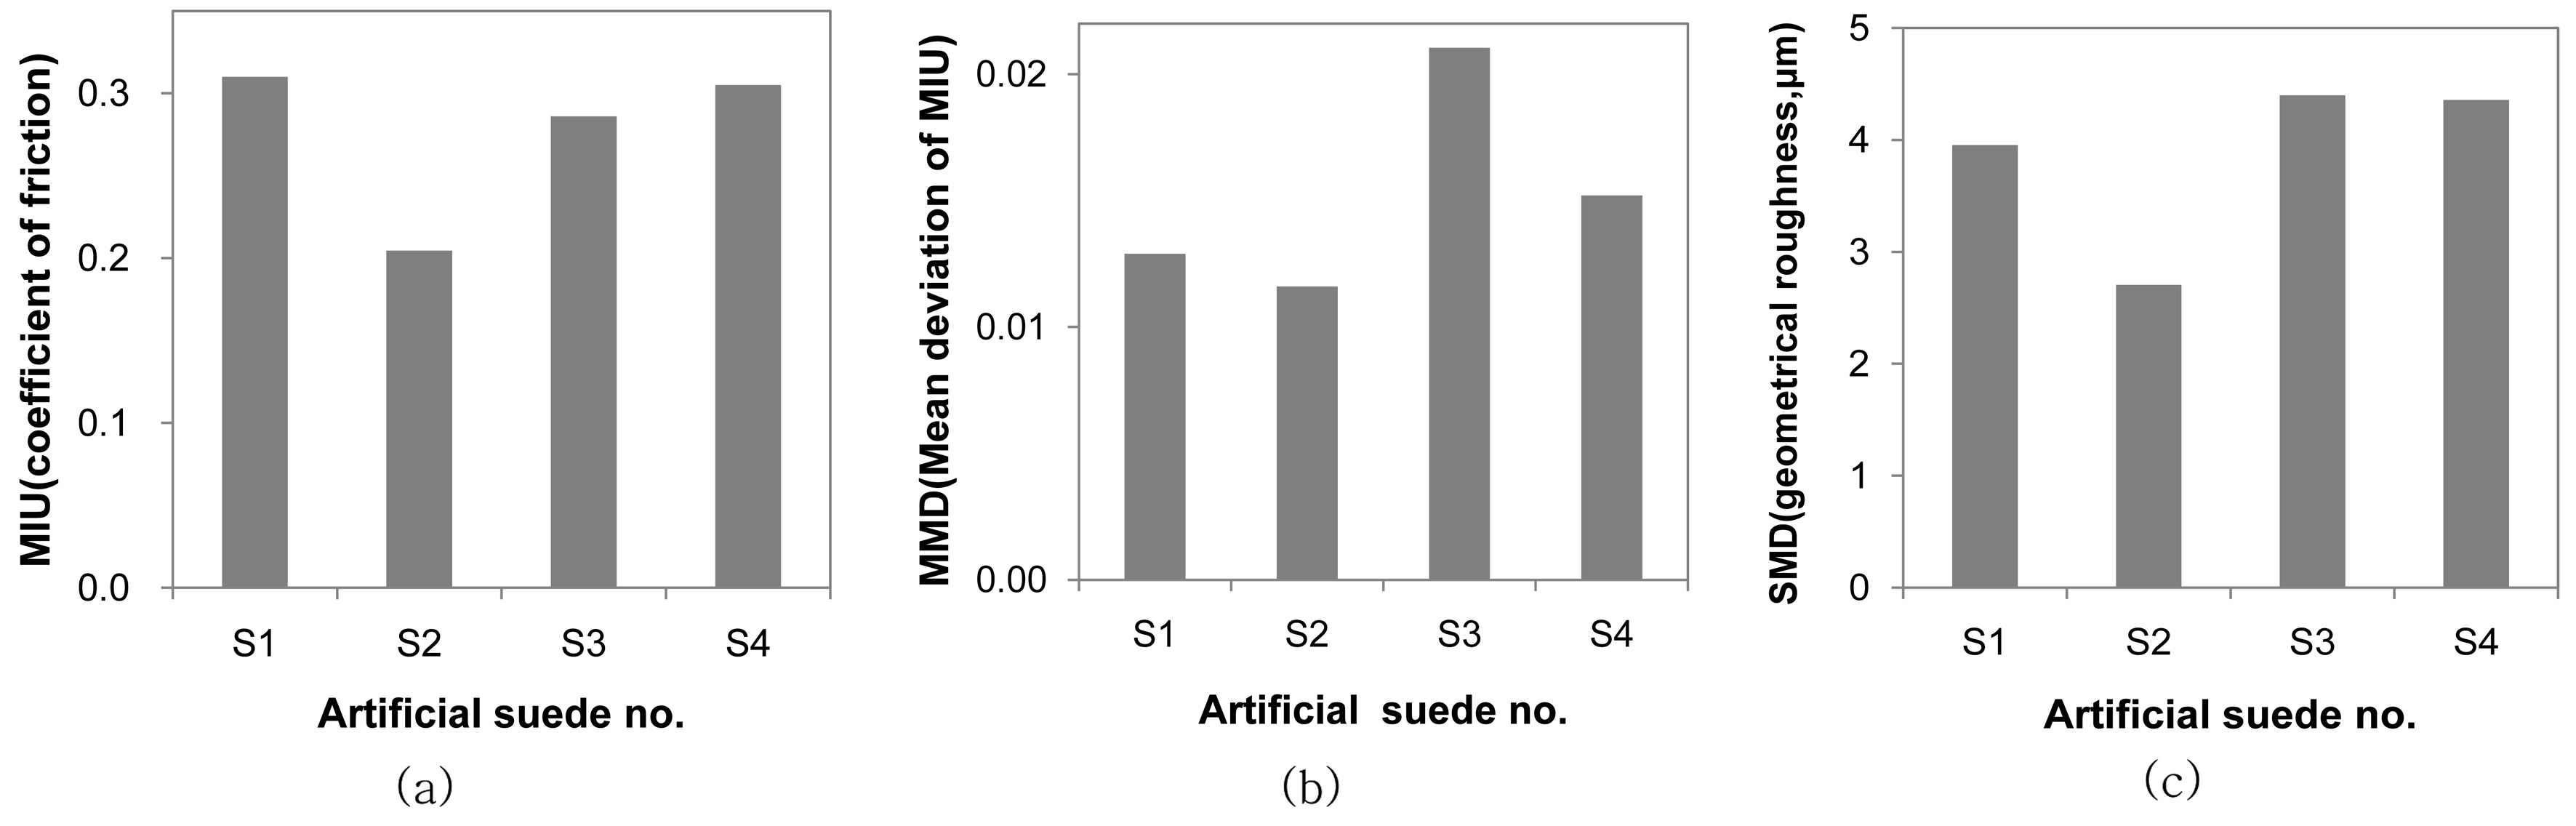 Surface properties of artificial suedes by KES-FB4; (a) MIU, (b) MMD, (c) SMD.